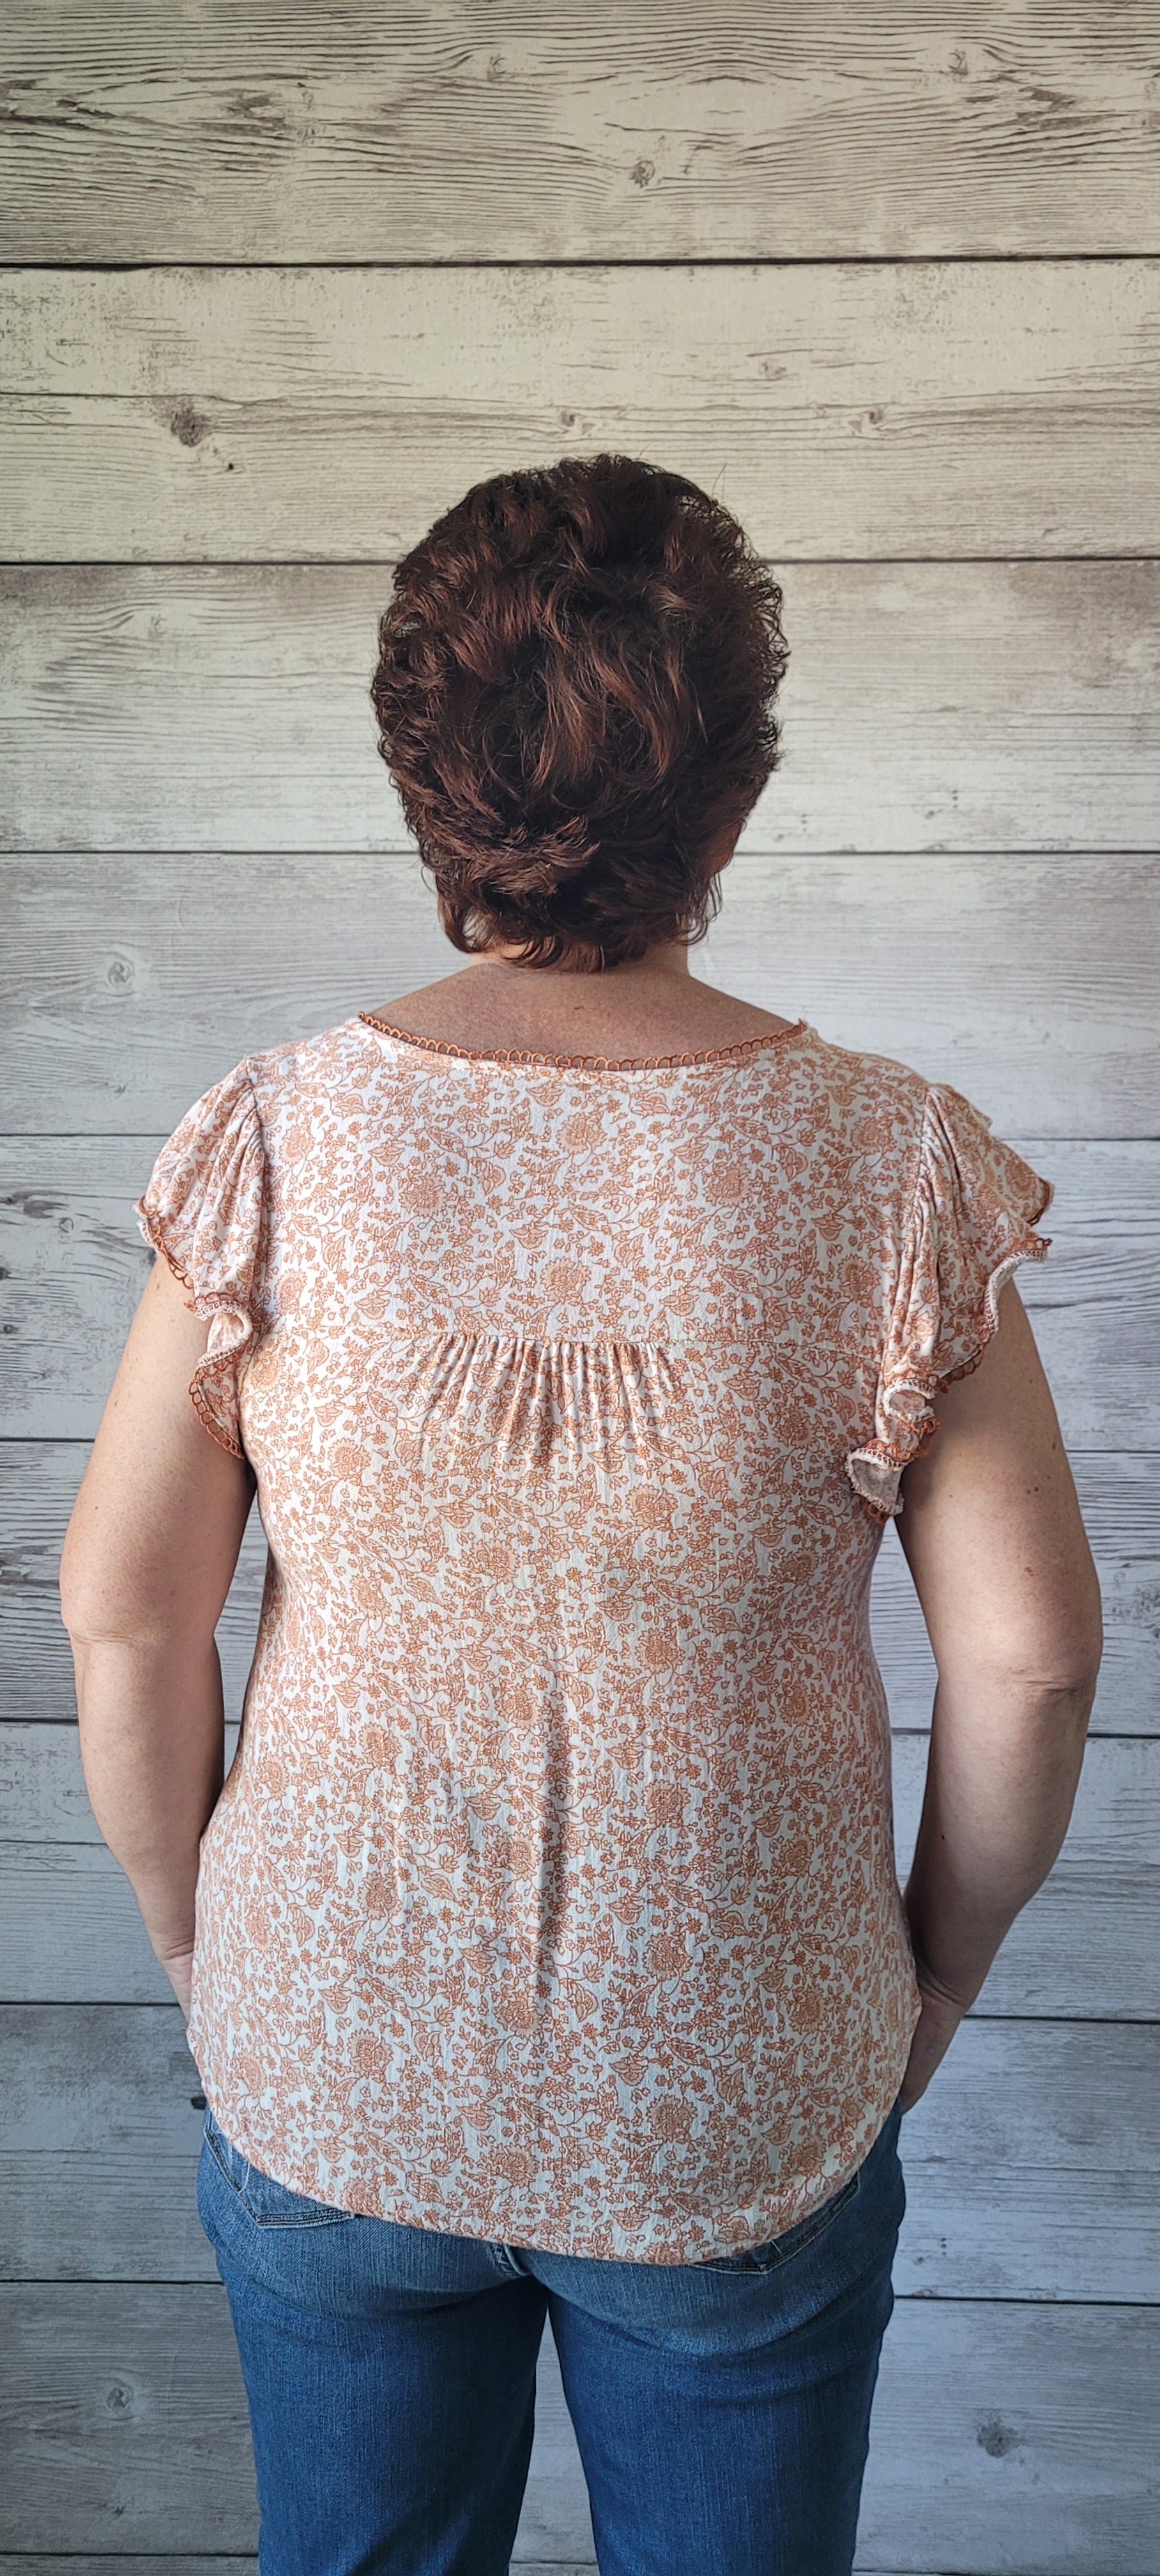 Dress to impress with this soft and dreamy "Tina Dusty Peach" top! With a split round neckline, a front tie with keyhole, flirty short sleeves, and a front chest-line lace, you'll look like you stepped out of a fairy tale. Puttin' the "wow" into every outfit! Sizes small through large.